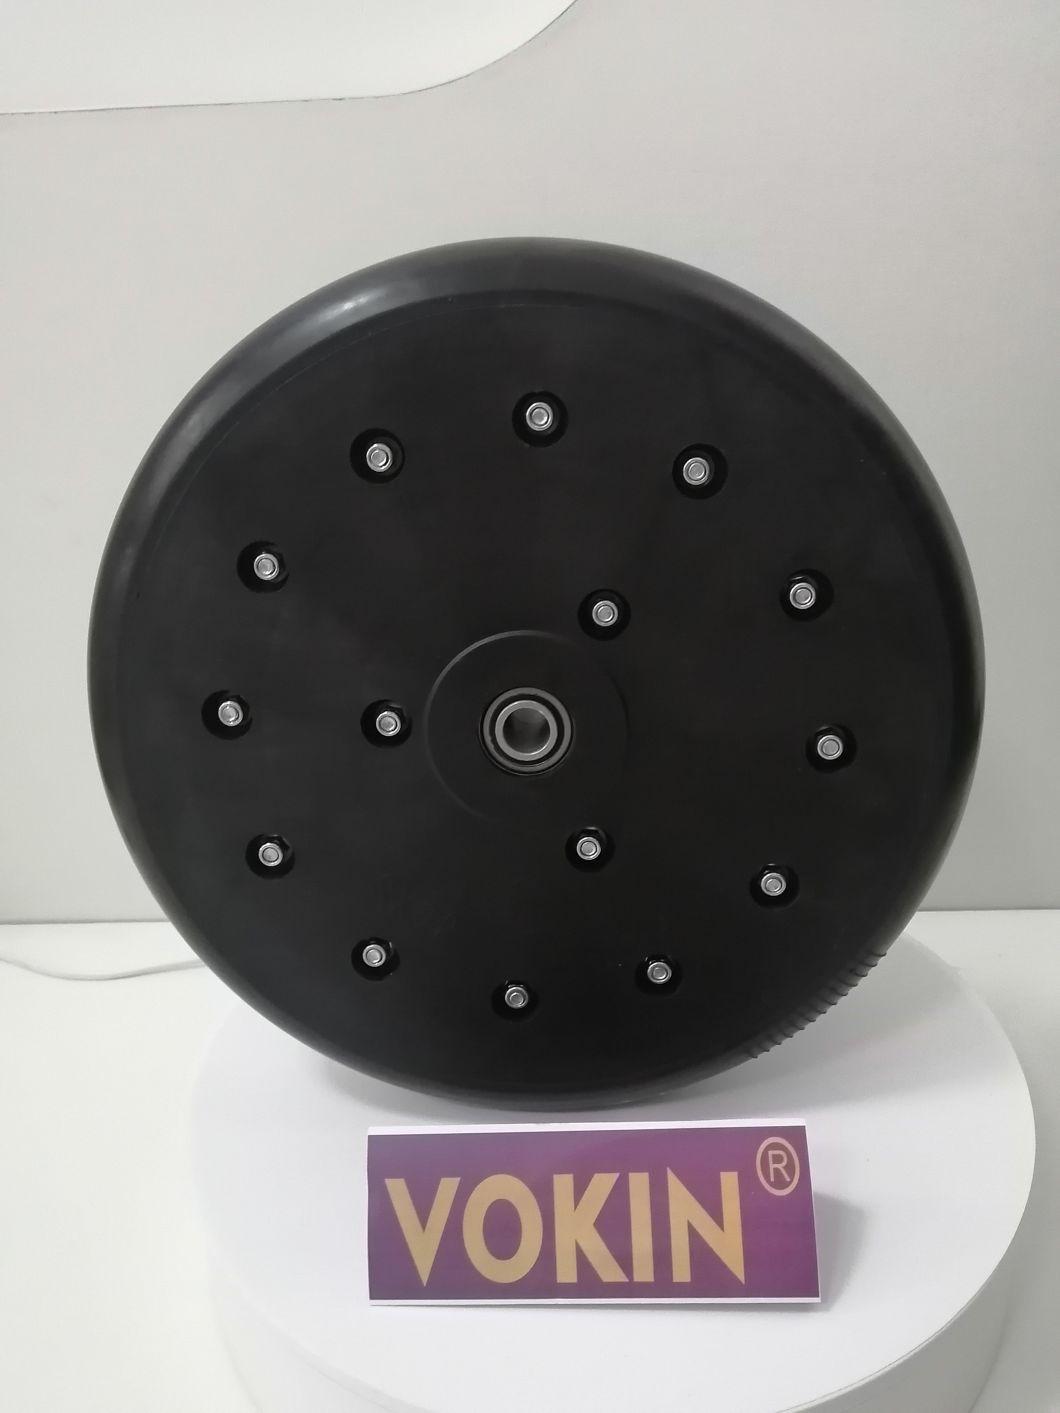 Maschio Gaspardo 1" X 12" (25 X 310 mm) Sower Tire and Wheel by Vokin- Planter Wheel Exporters